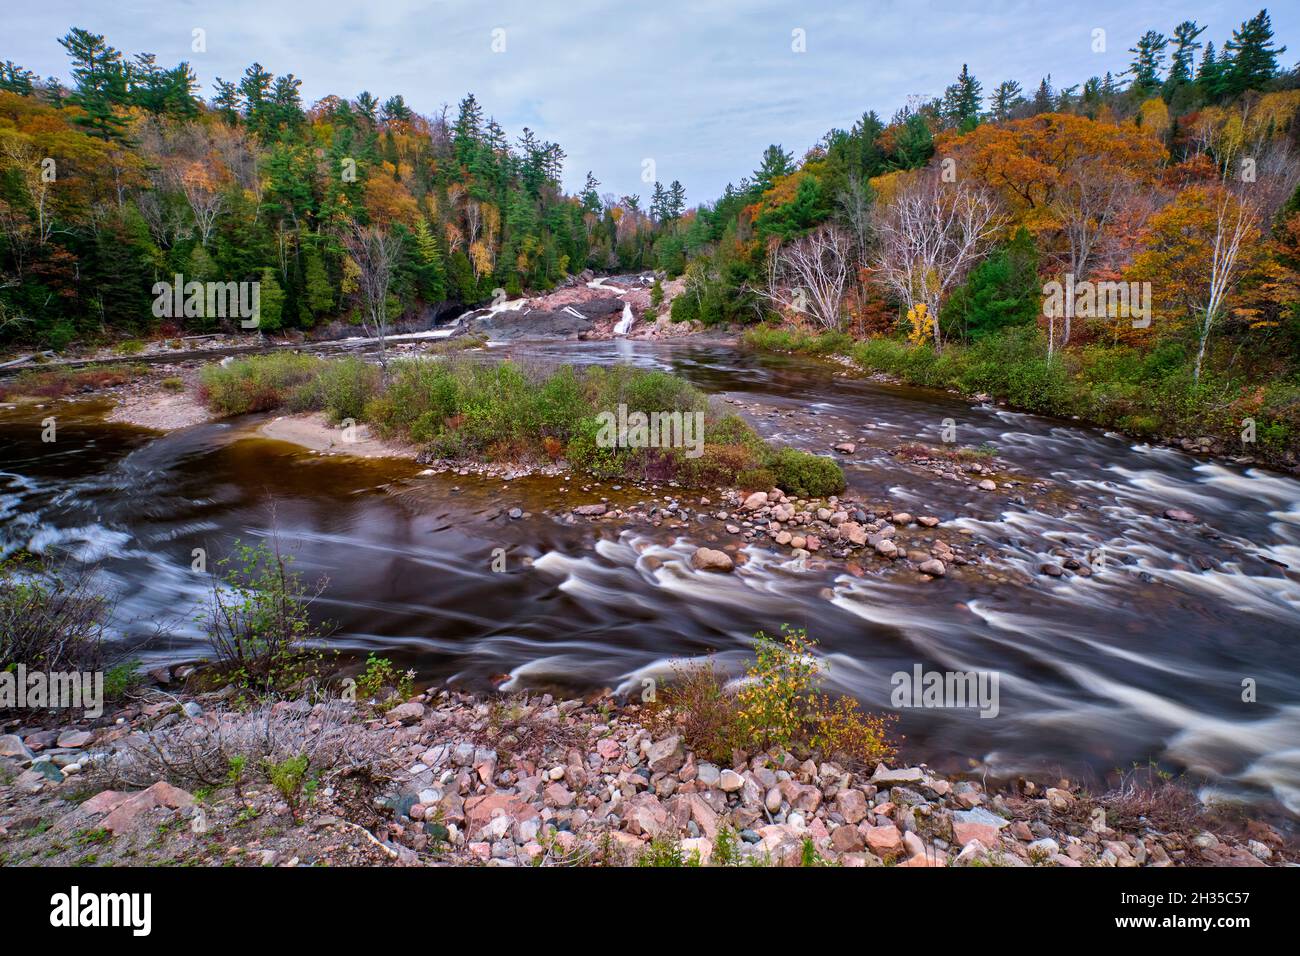 Chippewa Falls are located in the Algoma District of Northern Ontario Canada. Stock Photo